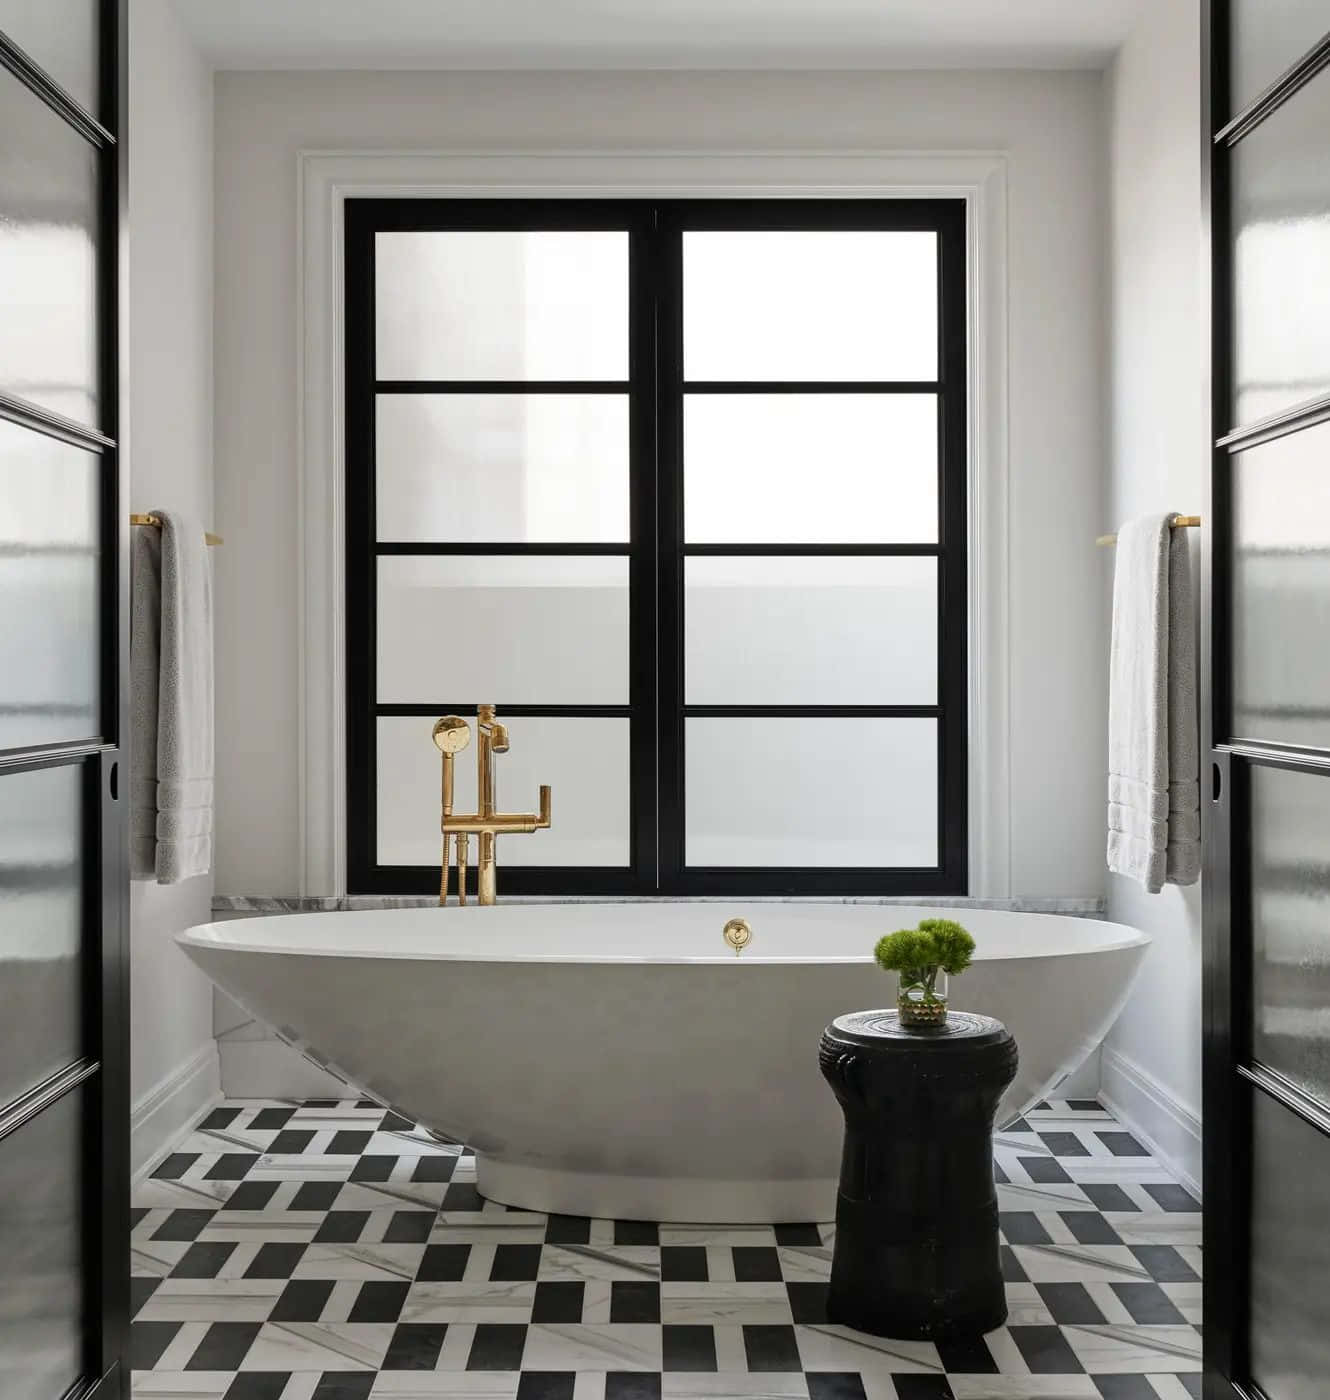 Create a timeless look in your bathroom.